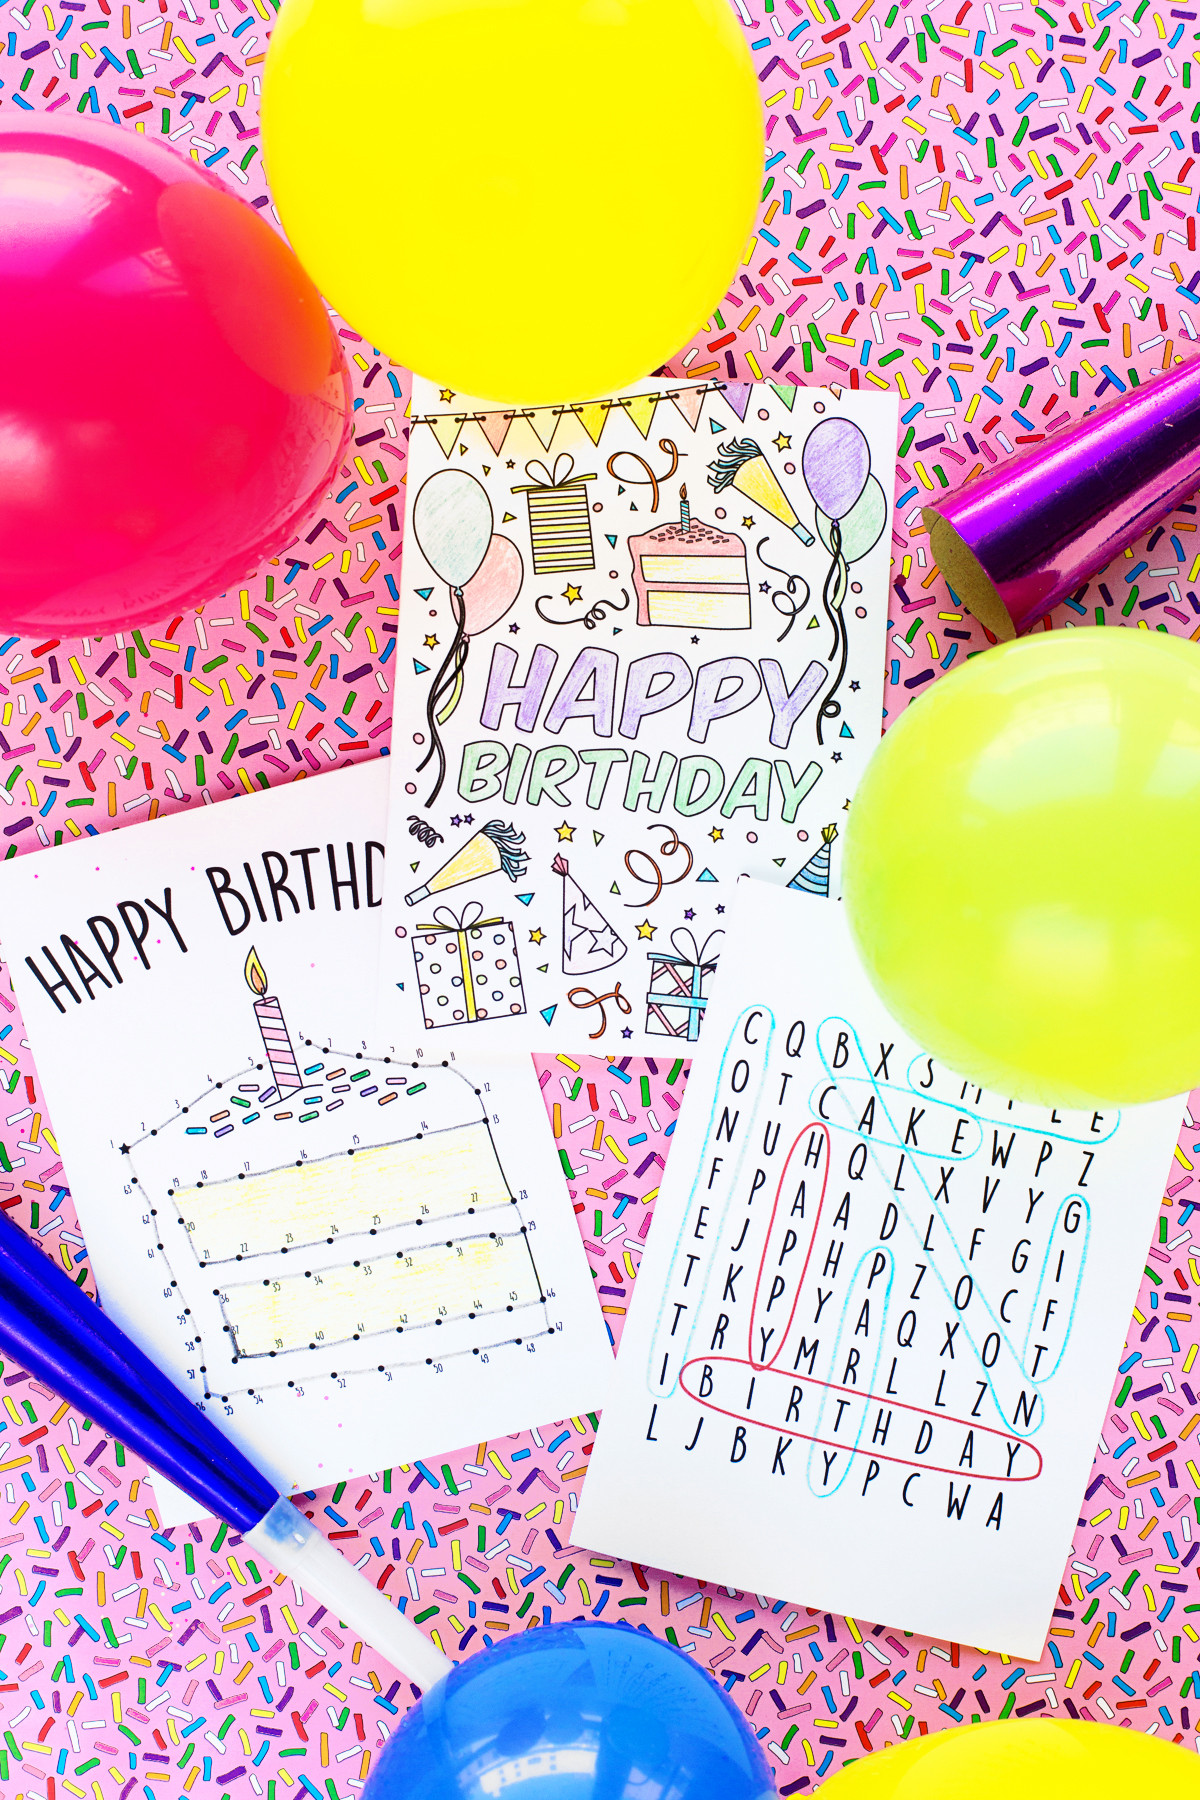 Birthday Cards To Print Out
 Free Printable Birthday Cards for Kids Studio DIY